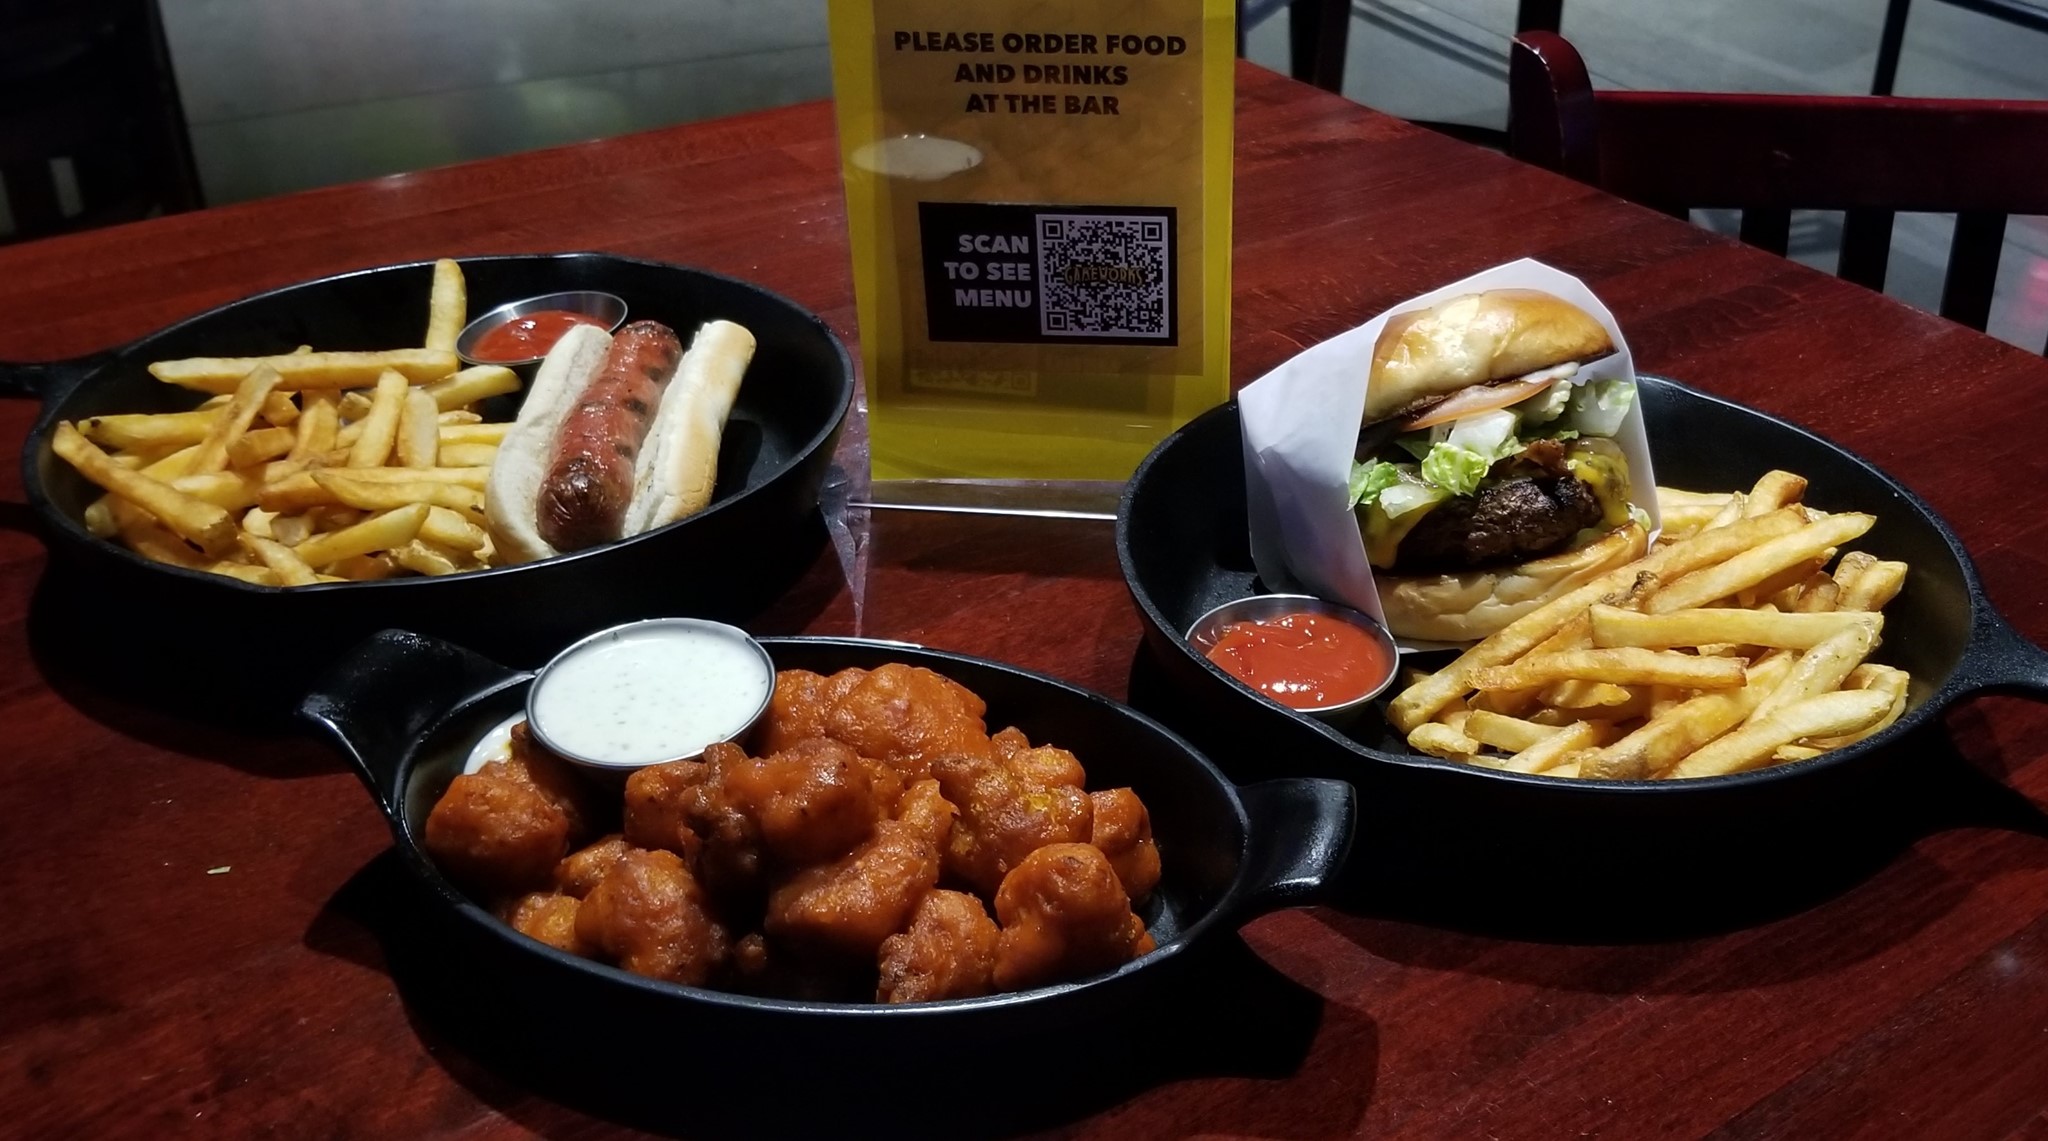 Check out GameWorks — Seattle’s menu for their delectable offerings